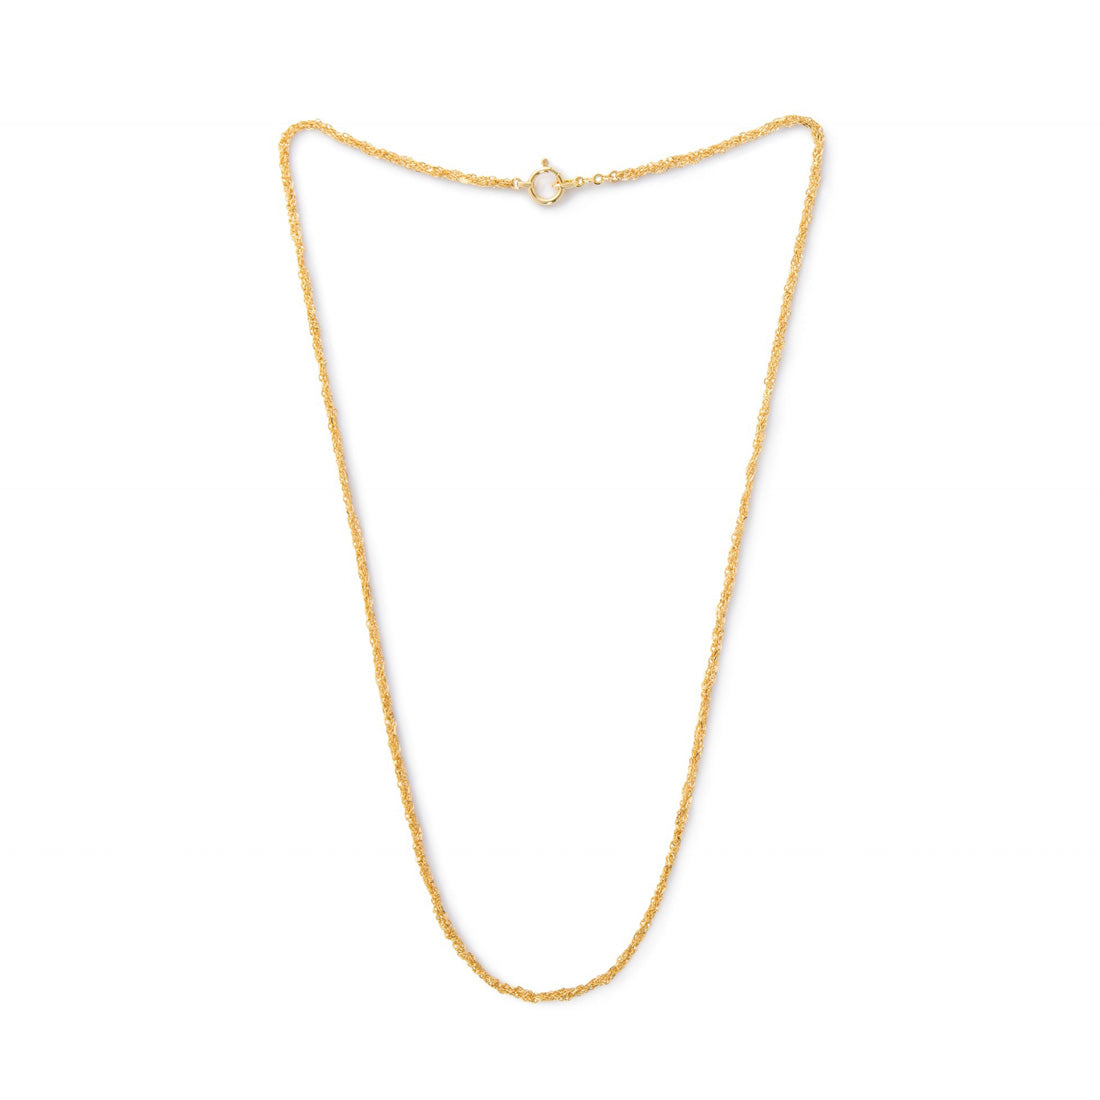 18K　Necklace　ネックレス　チェーンネックレス　イエローゴールド